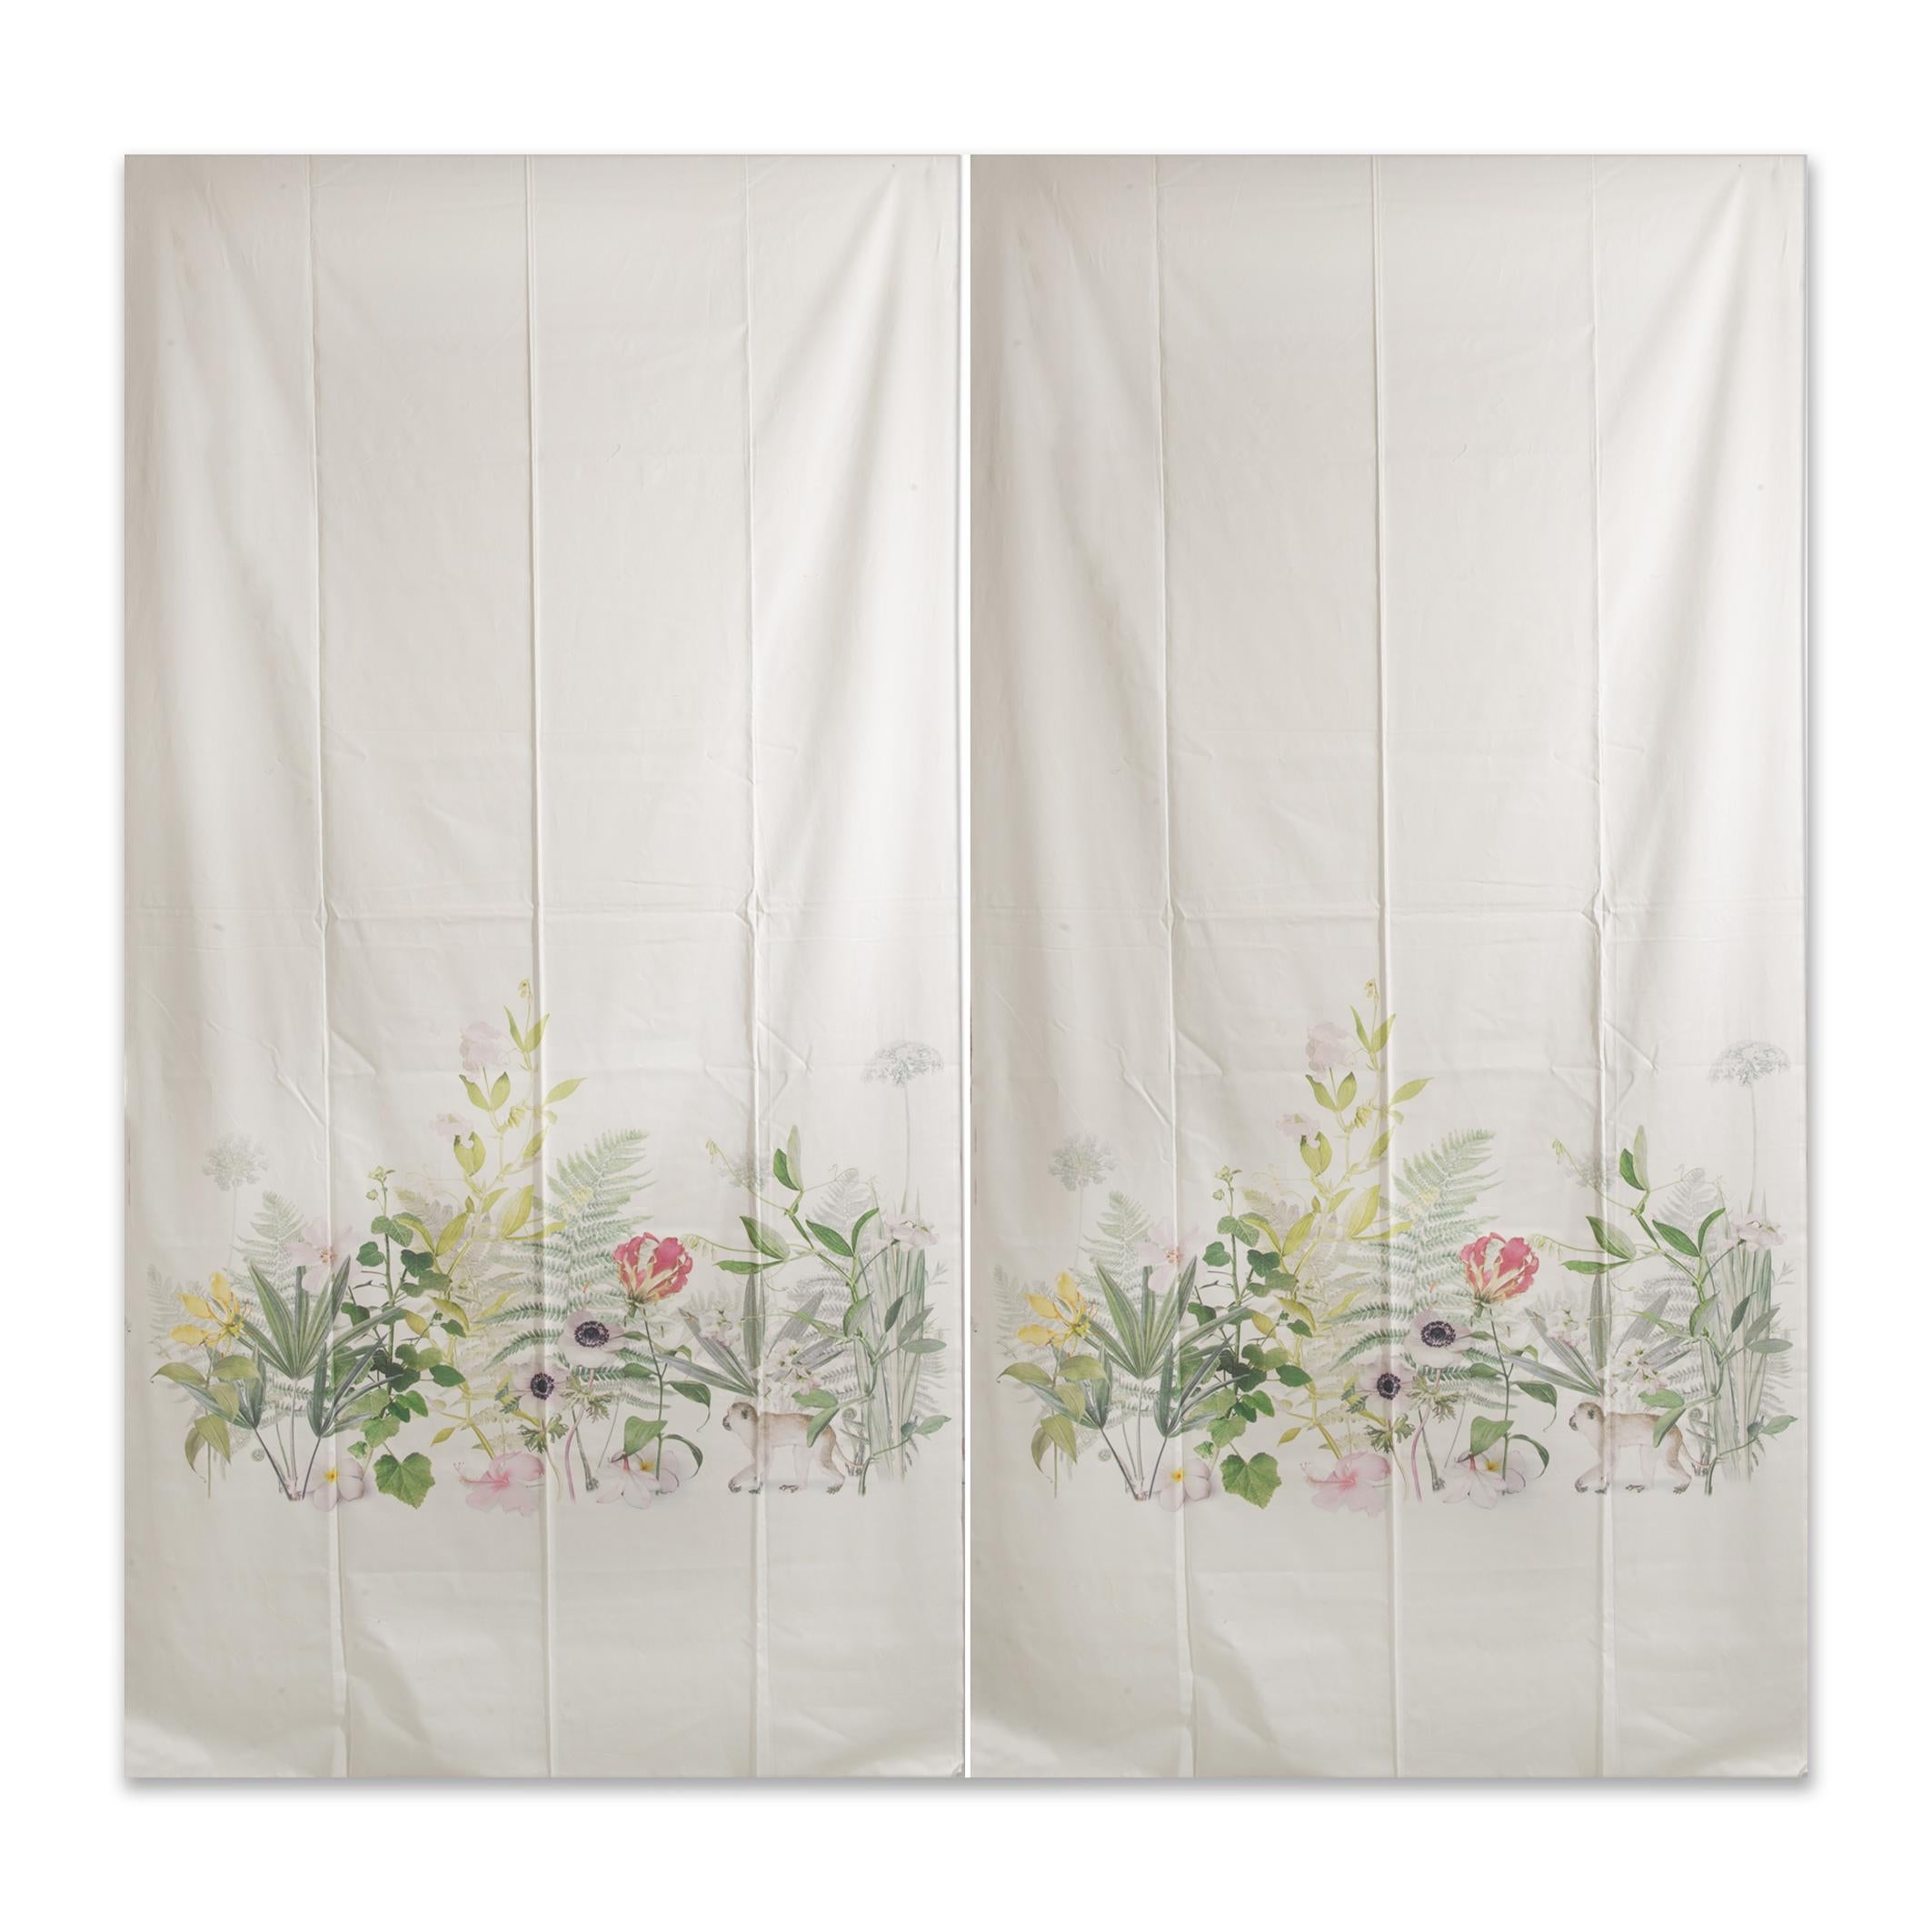 Pair of curtains in cotton sateen Fischbacher, Junghe model.
Why not change the curtains in the spring ? These completely renovate a room.
Fischbacher is one of the most famous fabric manufacturer in Europe.